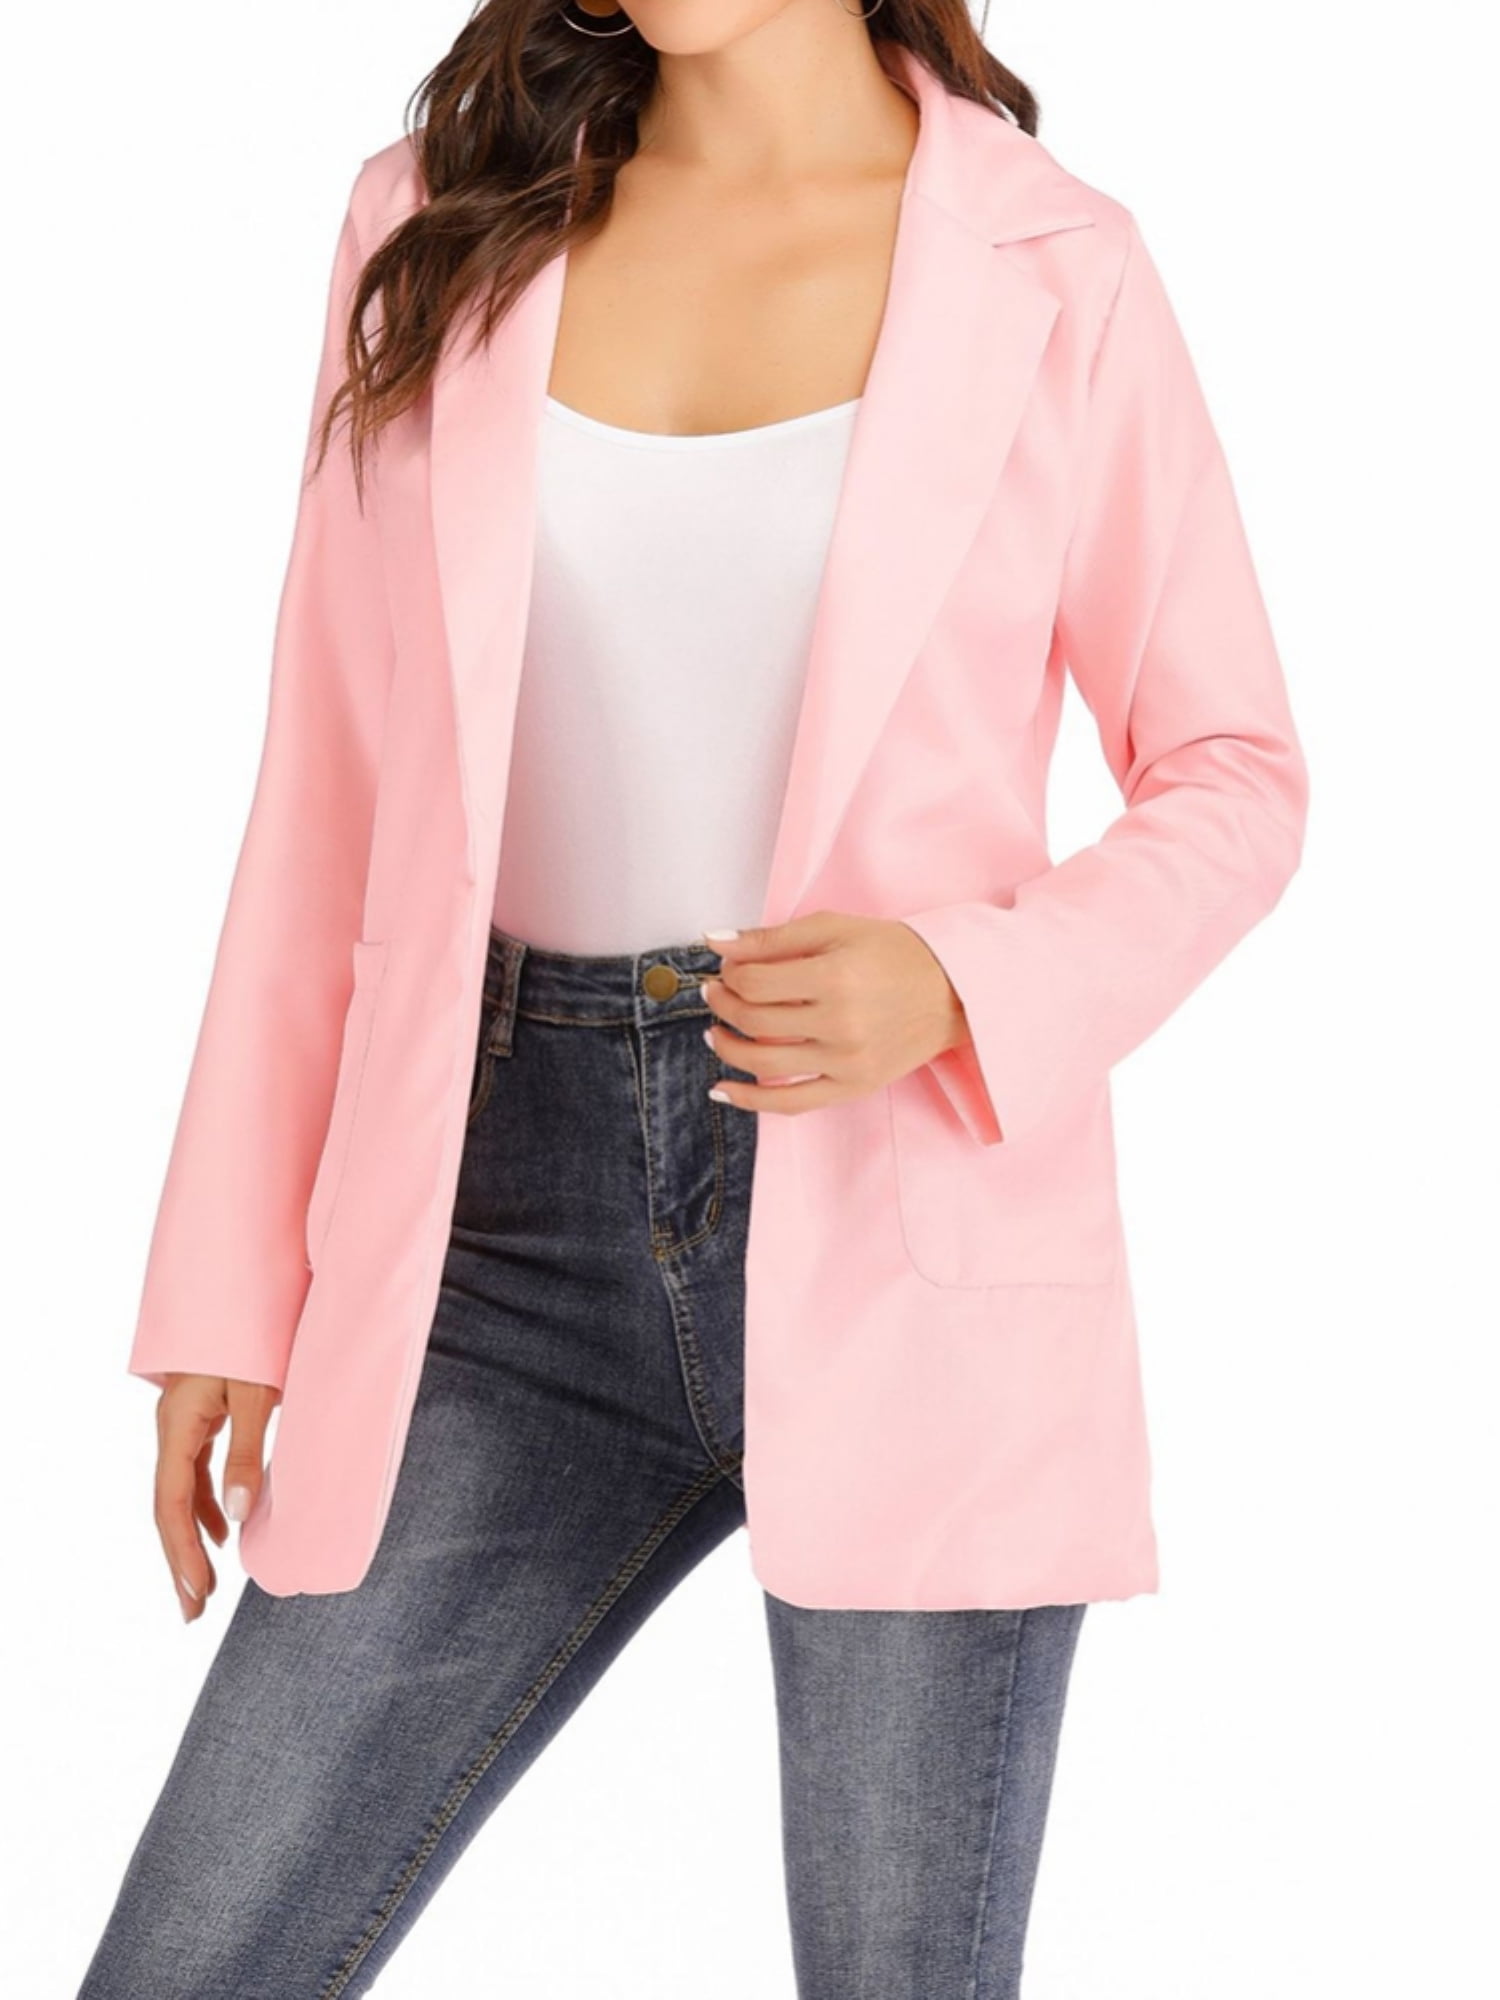 Blazer Jackets for Women Business Casual Petite Long Sleeve Padded Shoulder Shirt Lapel Single Breasted Outwear 